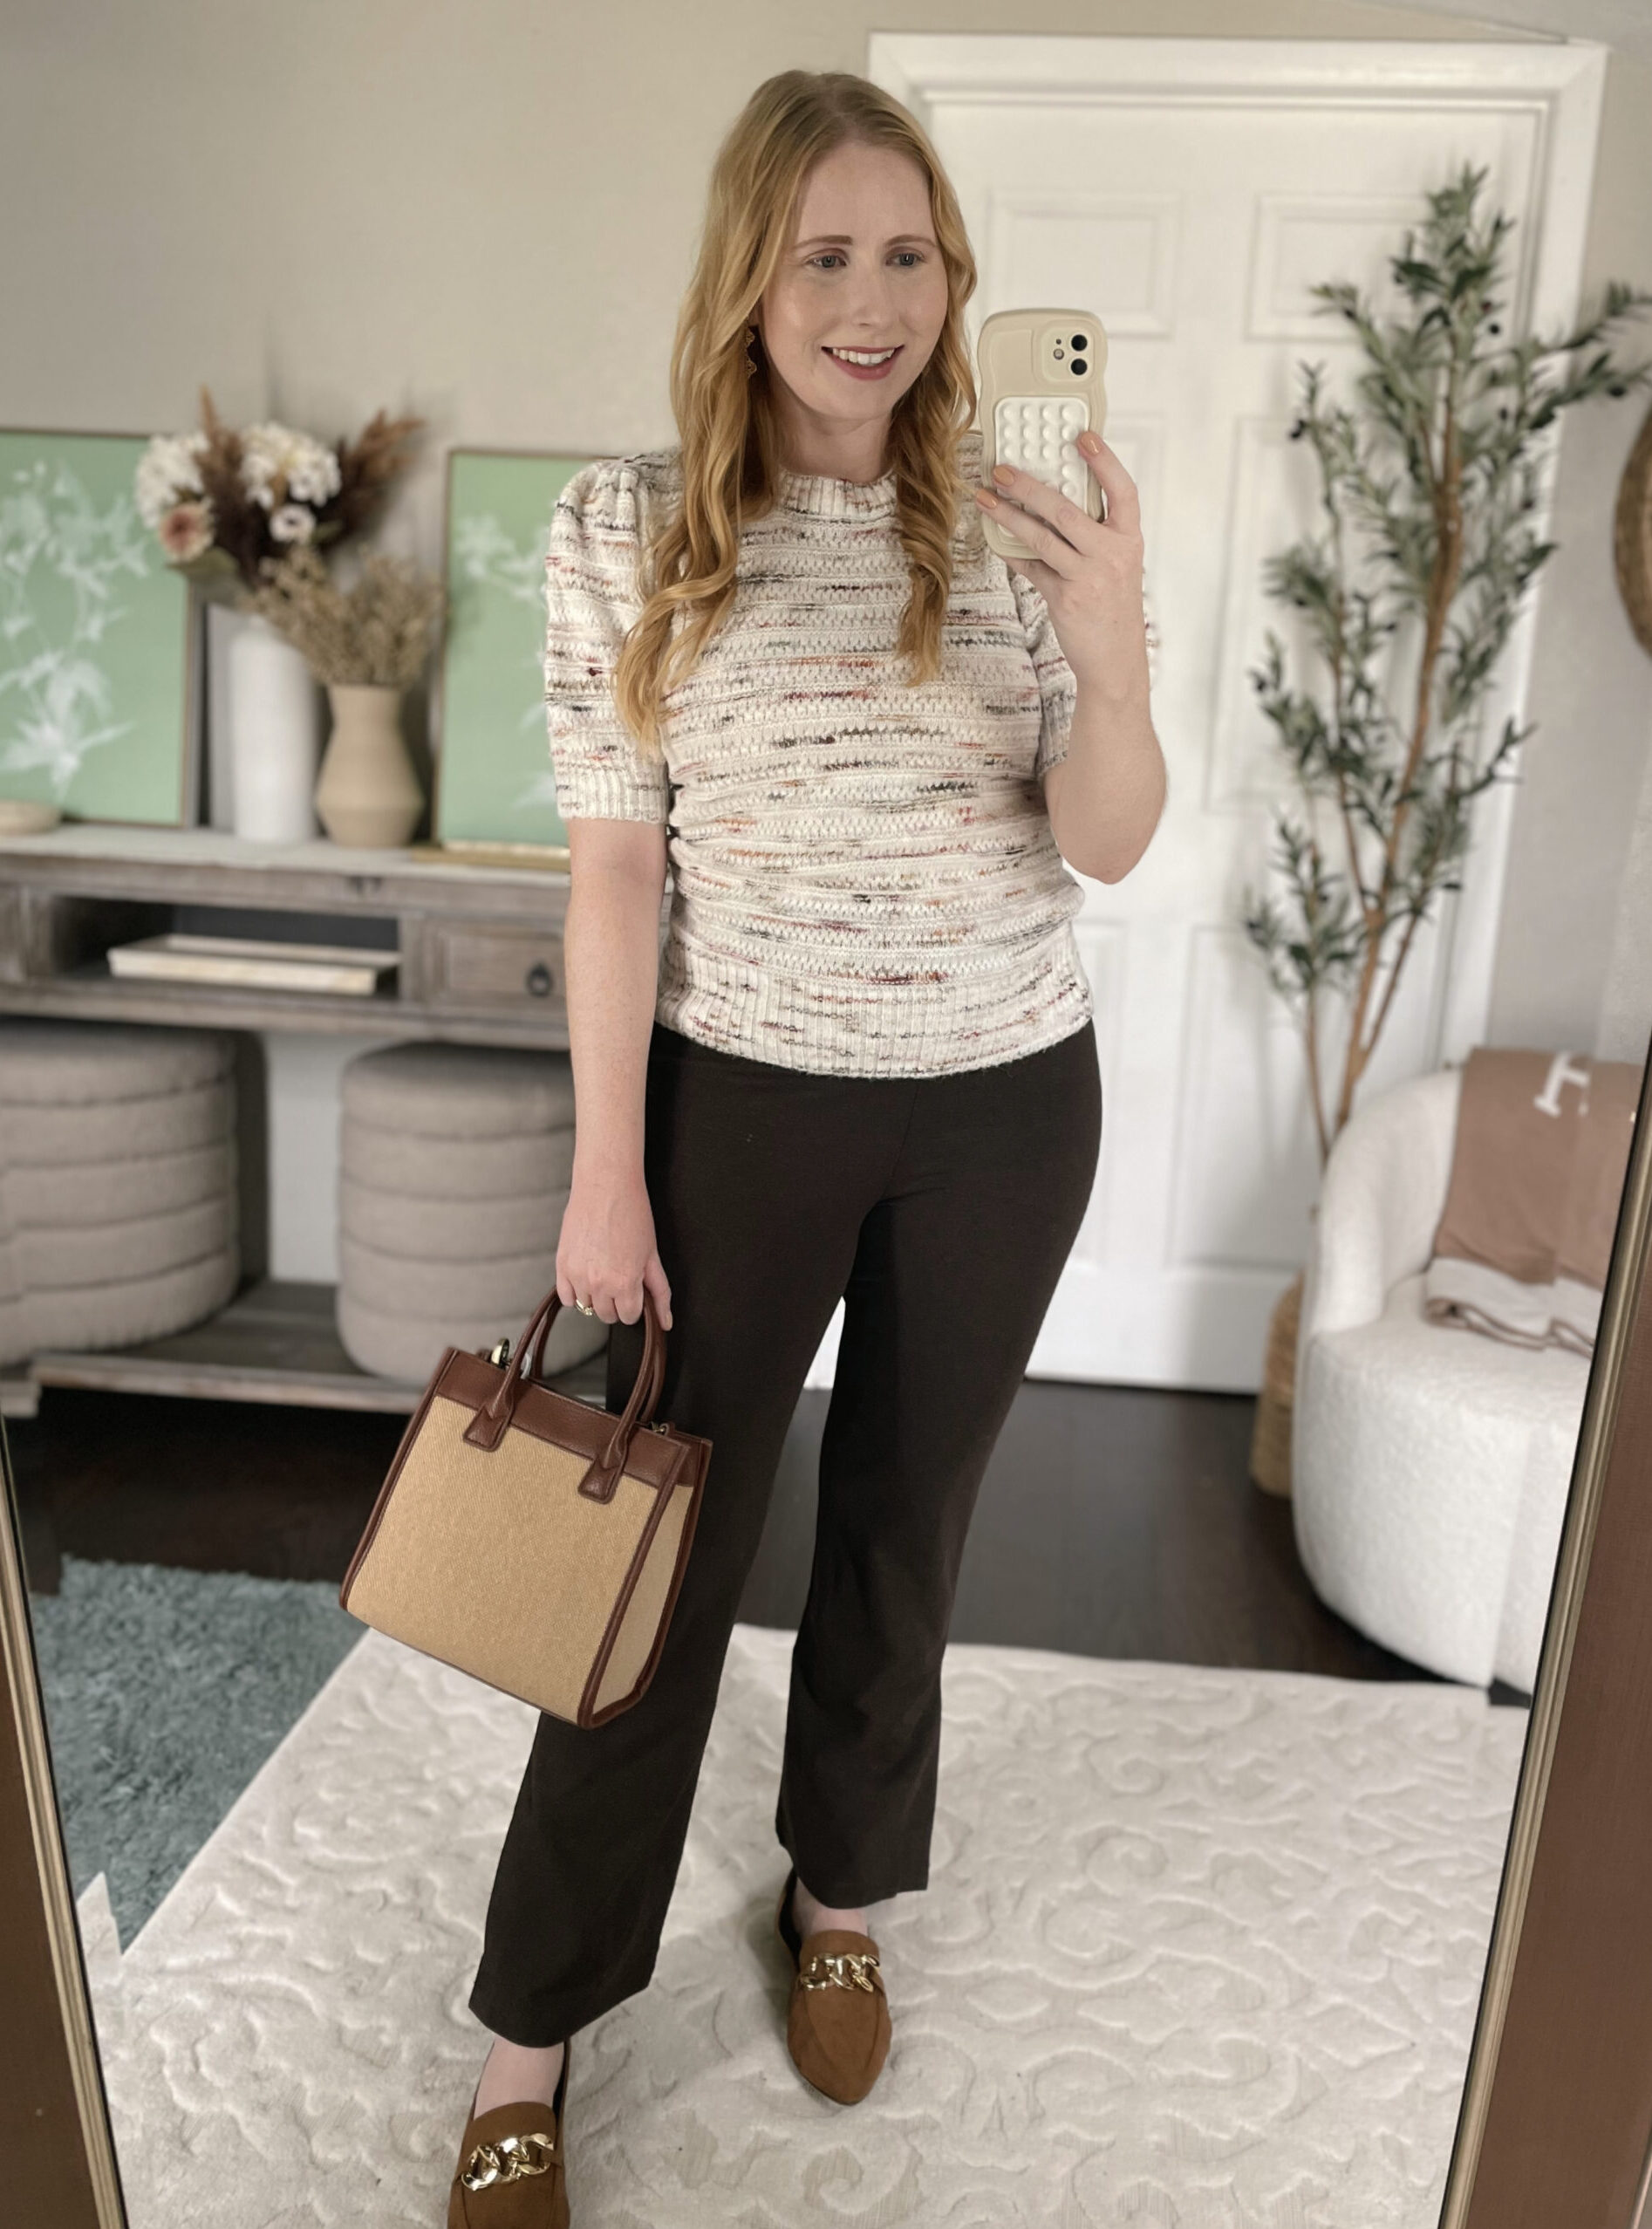 The Best Fall Outfits When You're Busy Working From Home - A Pact